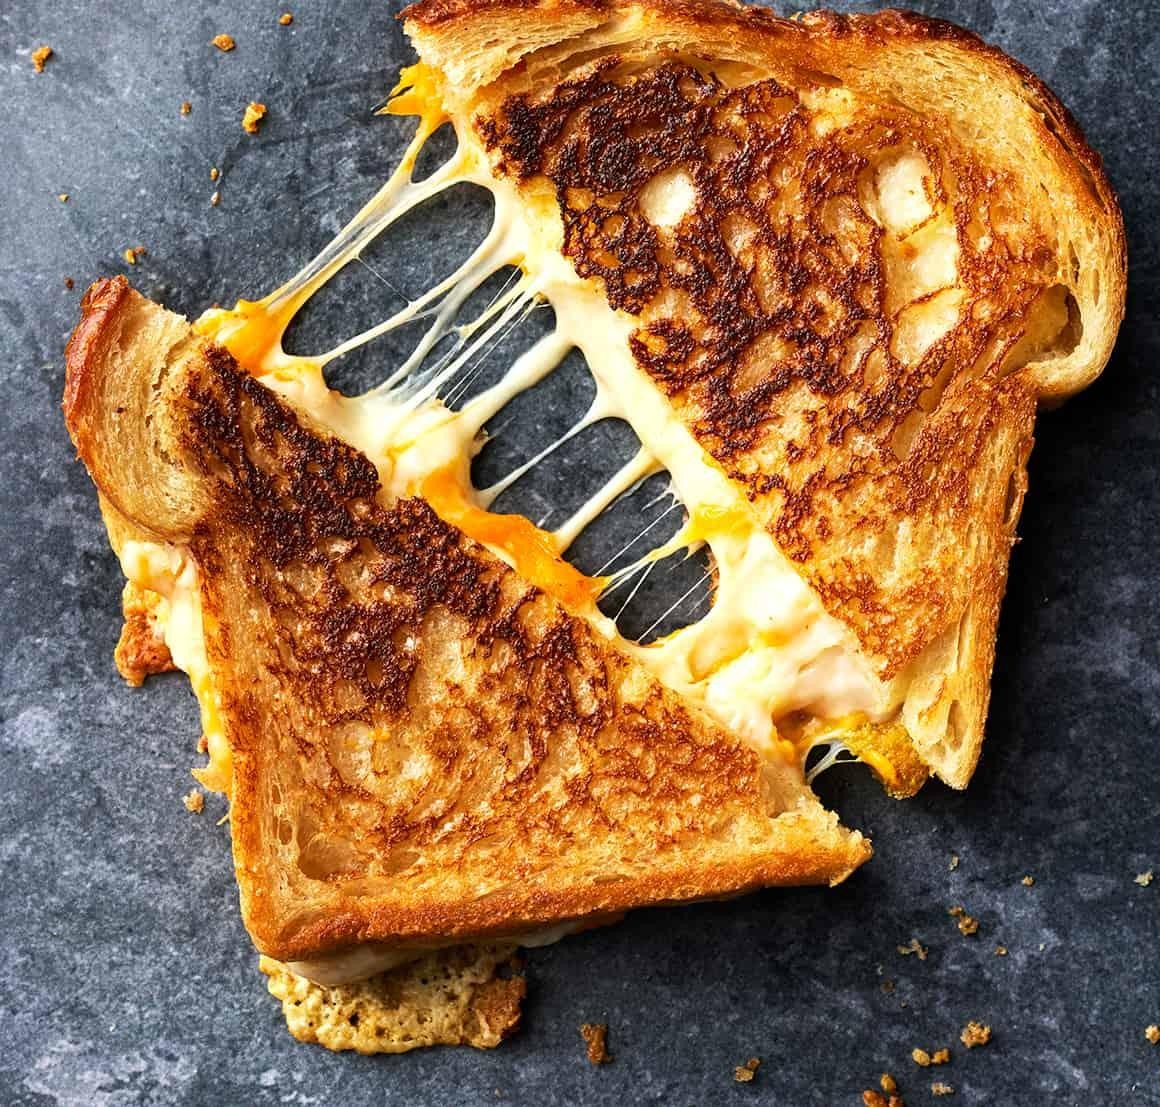 GRILLED CHEESE PANINI